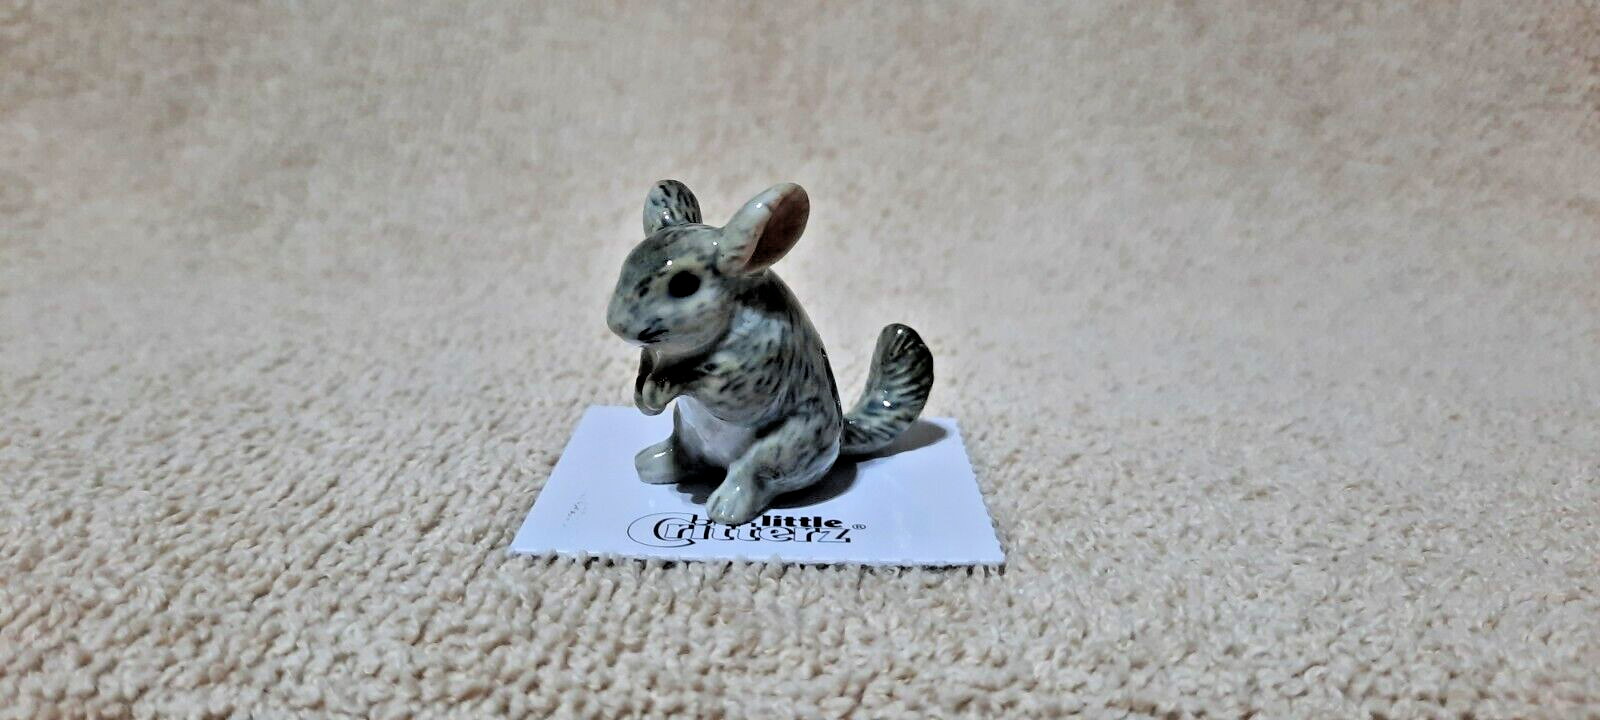 LITTLE CRITTERZ Chinchilla "Andes" Miniature Figurine New FREE SHIPPING LC937 Little Critterz